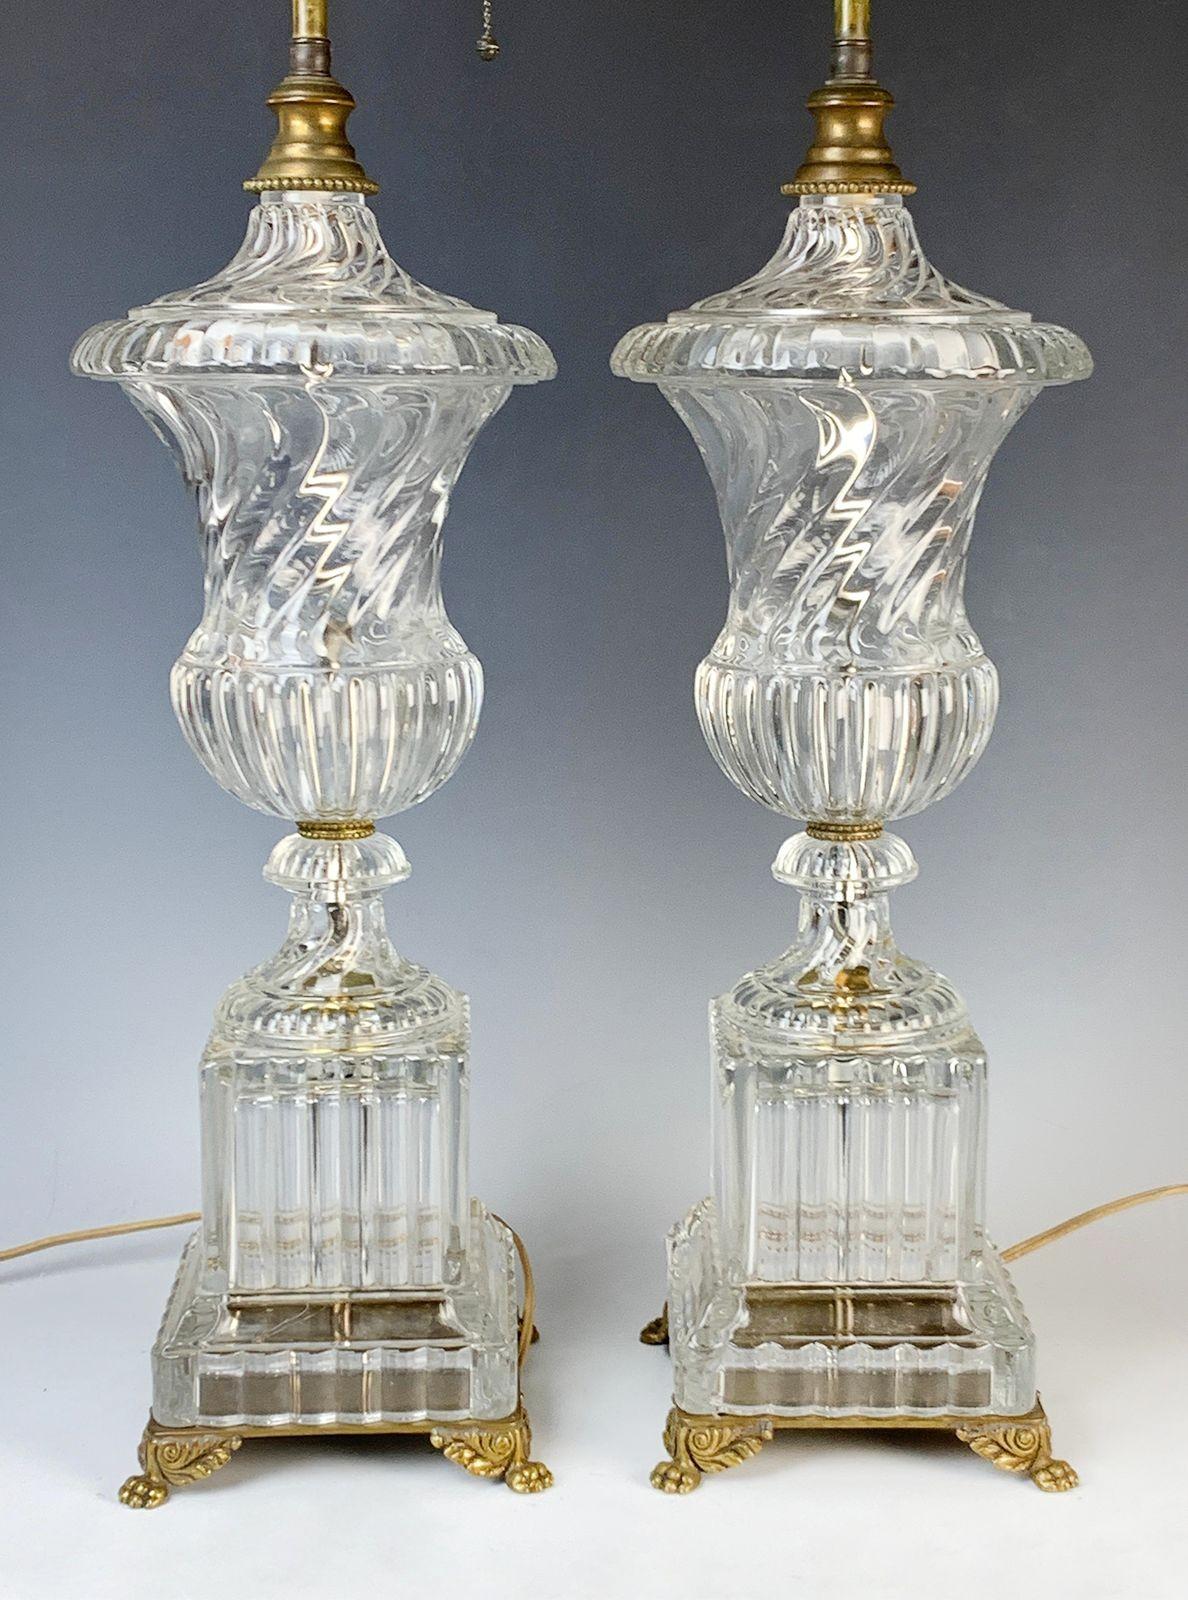 Pair of Baccarat swirl crystal table lamps. Made in France, c. 1920's. Complementing the luminous crystal, the lamps are adorned with finely bronze accents.
*Rewired to fit US lighting standards
Dimensions:
39.5